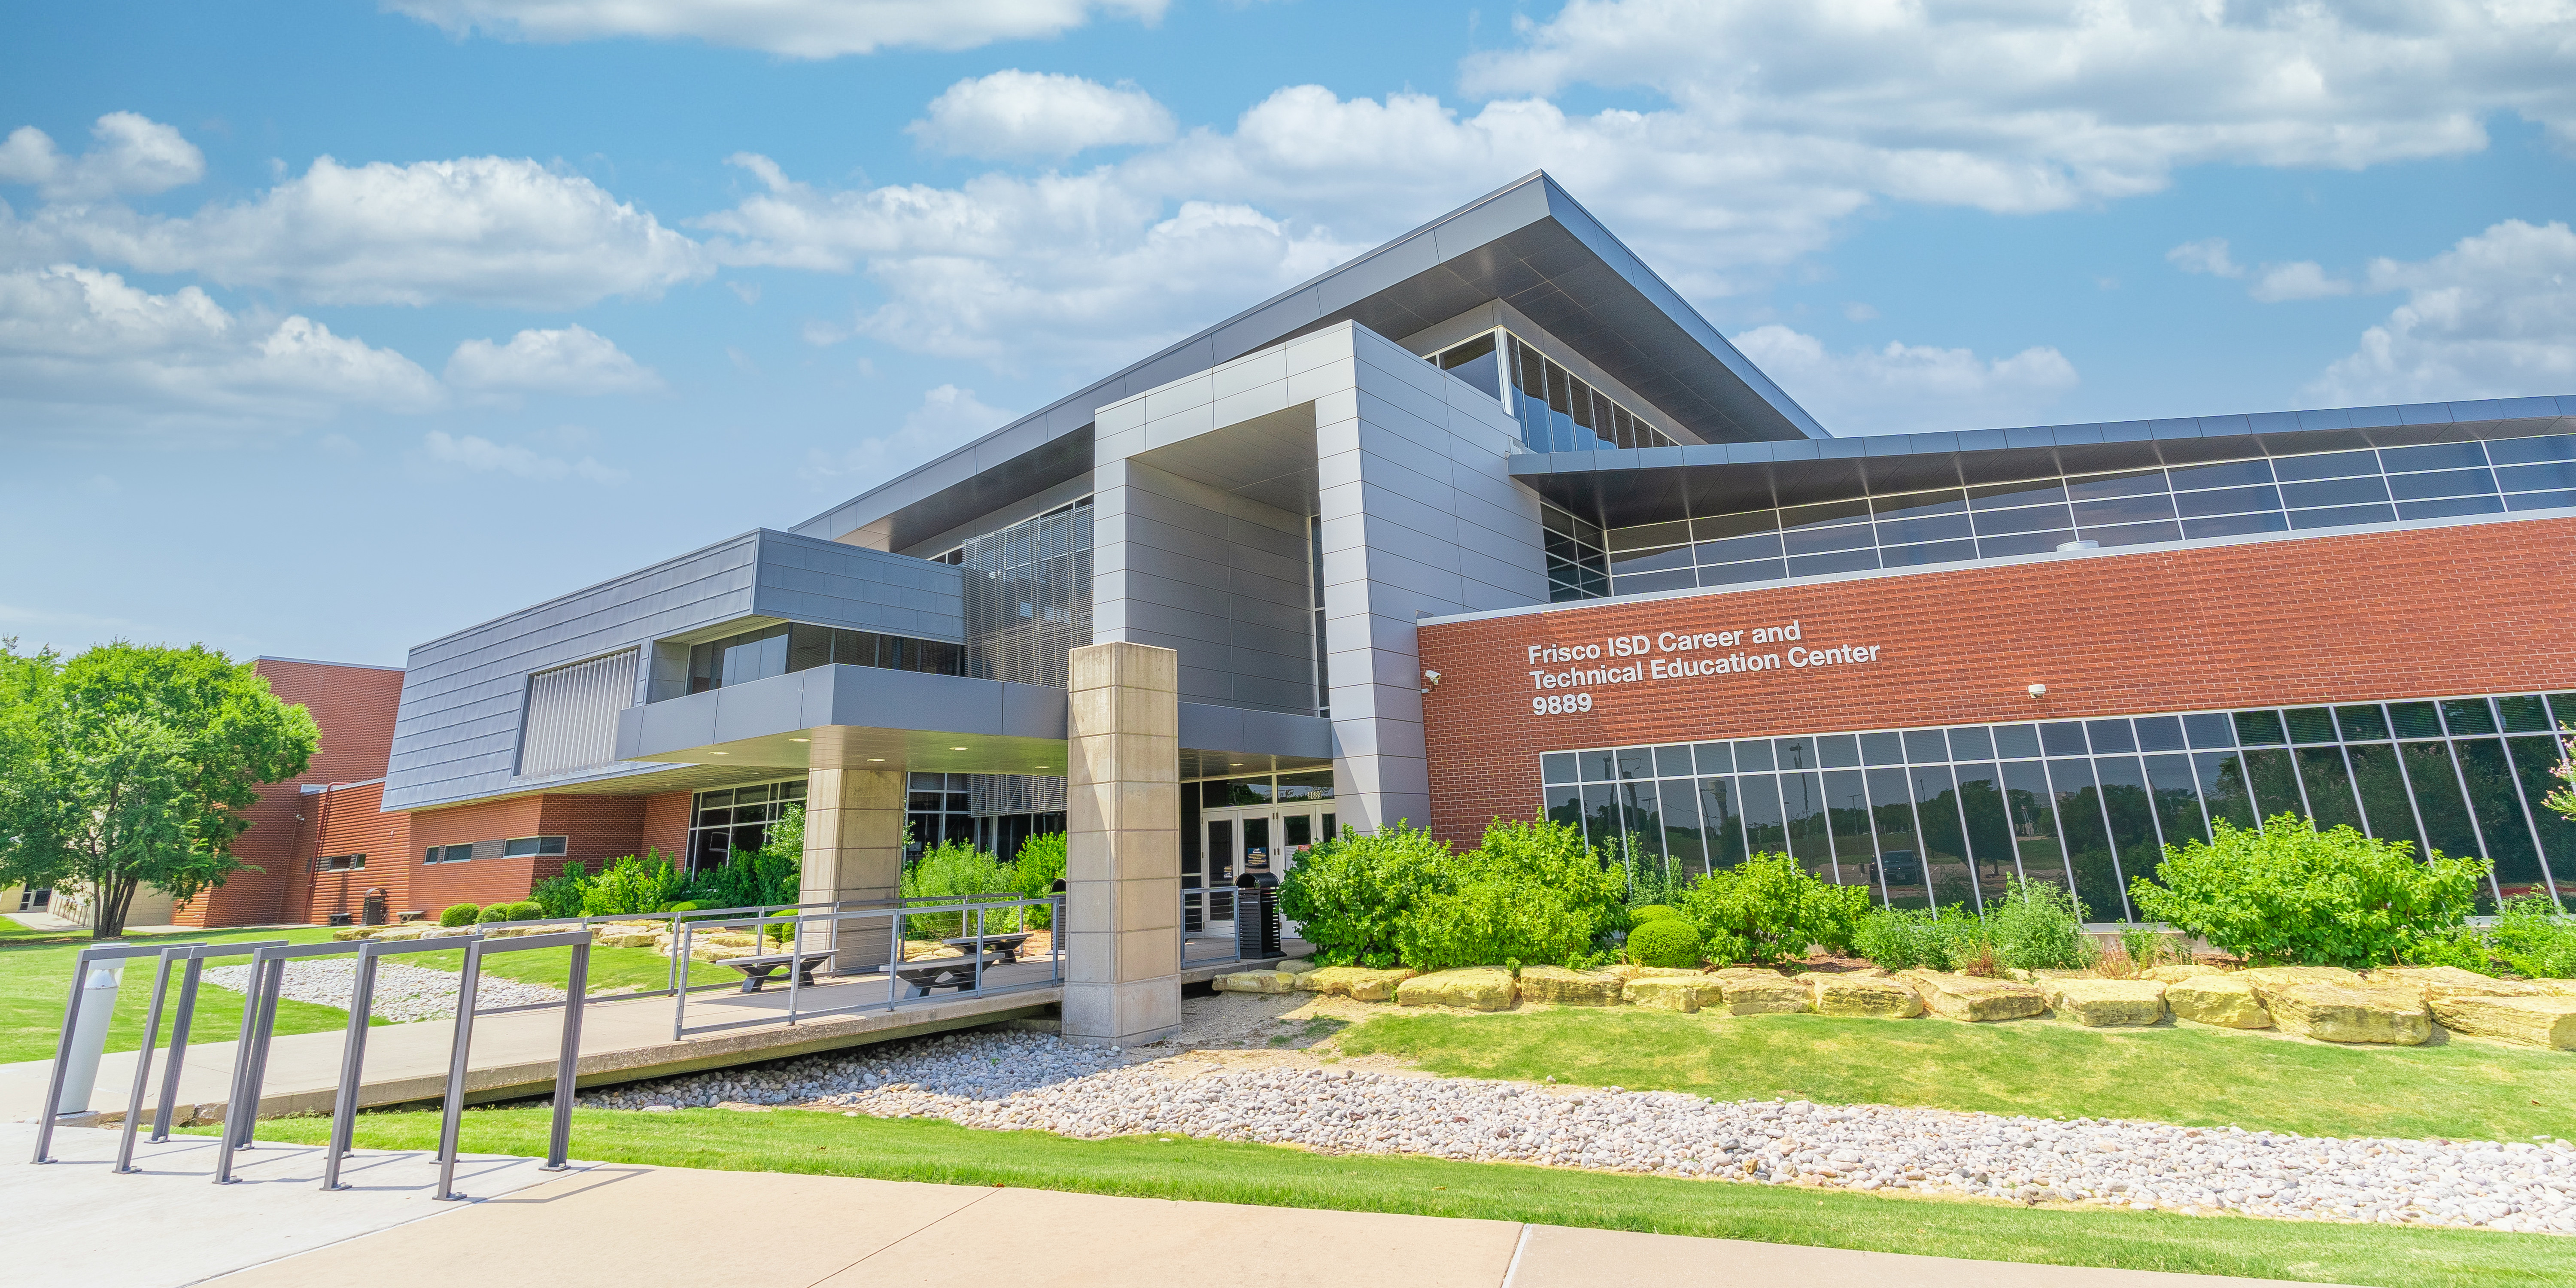 Frisco ISD Career and Technical Education Center